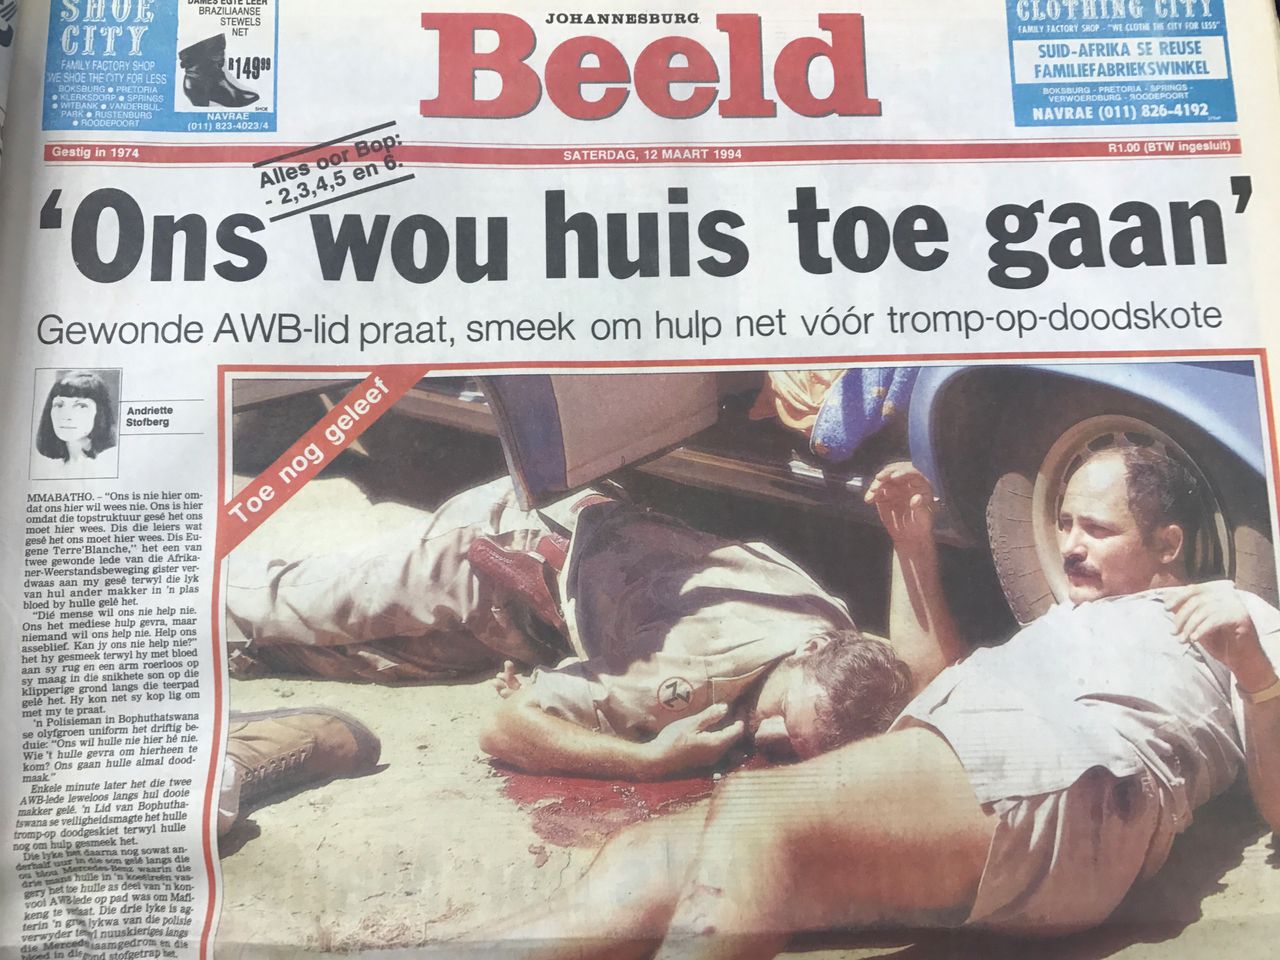 Beeld newspaper's front page on March 12 1994 after the execution of three AWB members in the former Bophuthatswana.